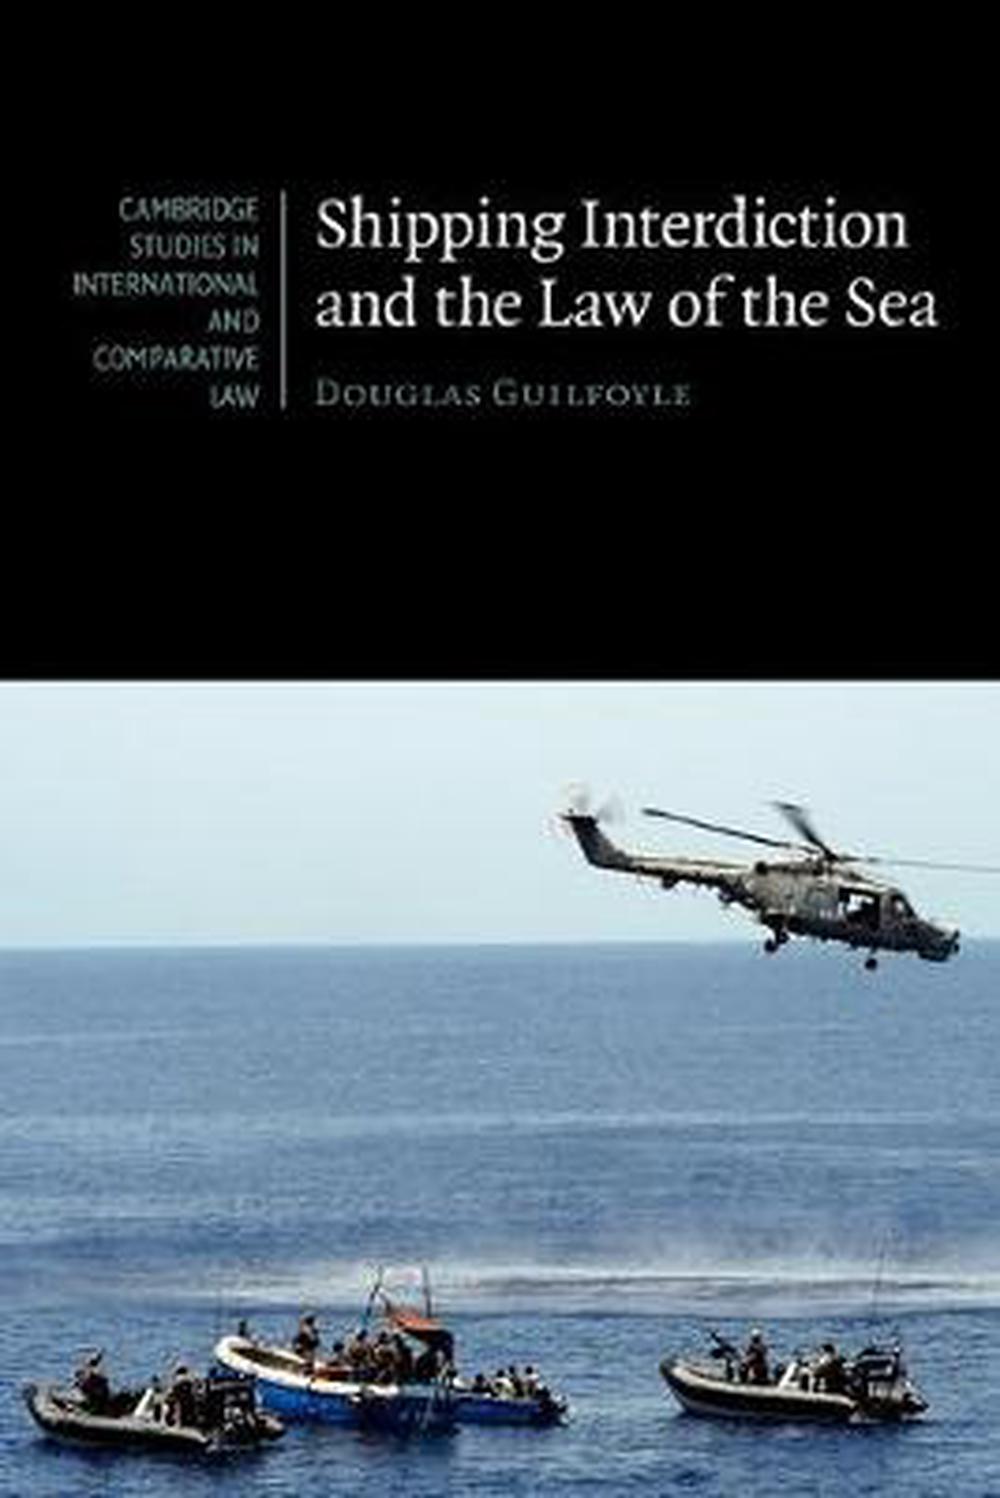 Maritime Power and the Law of the Sea by James Kraska